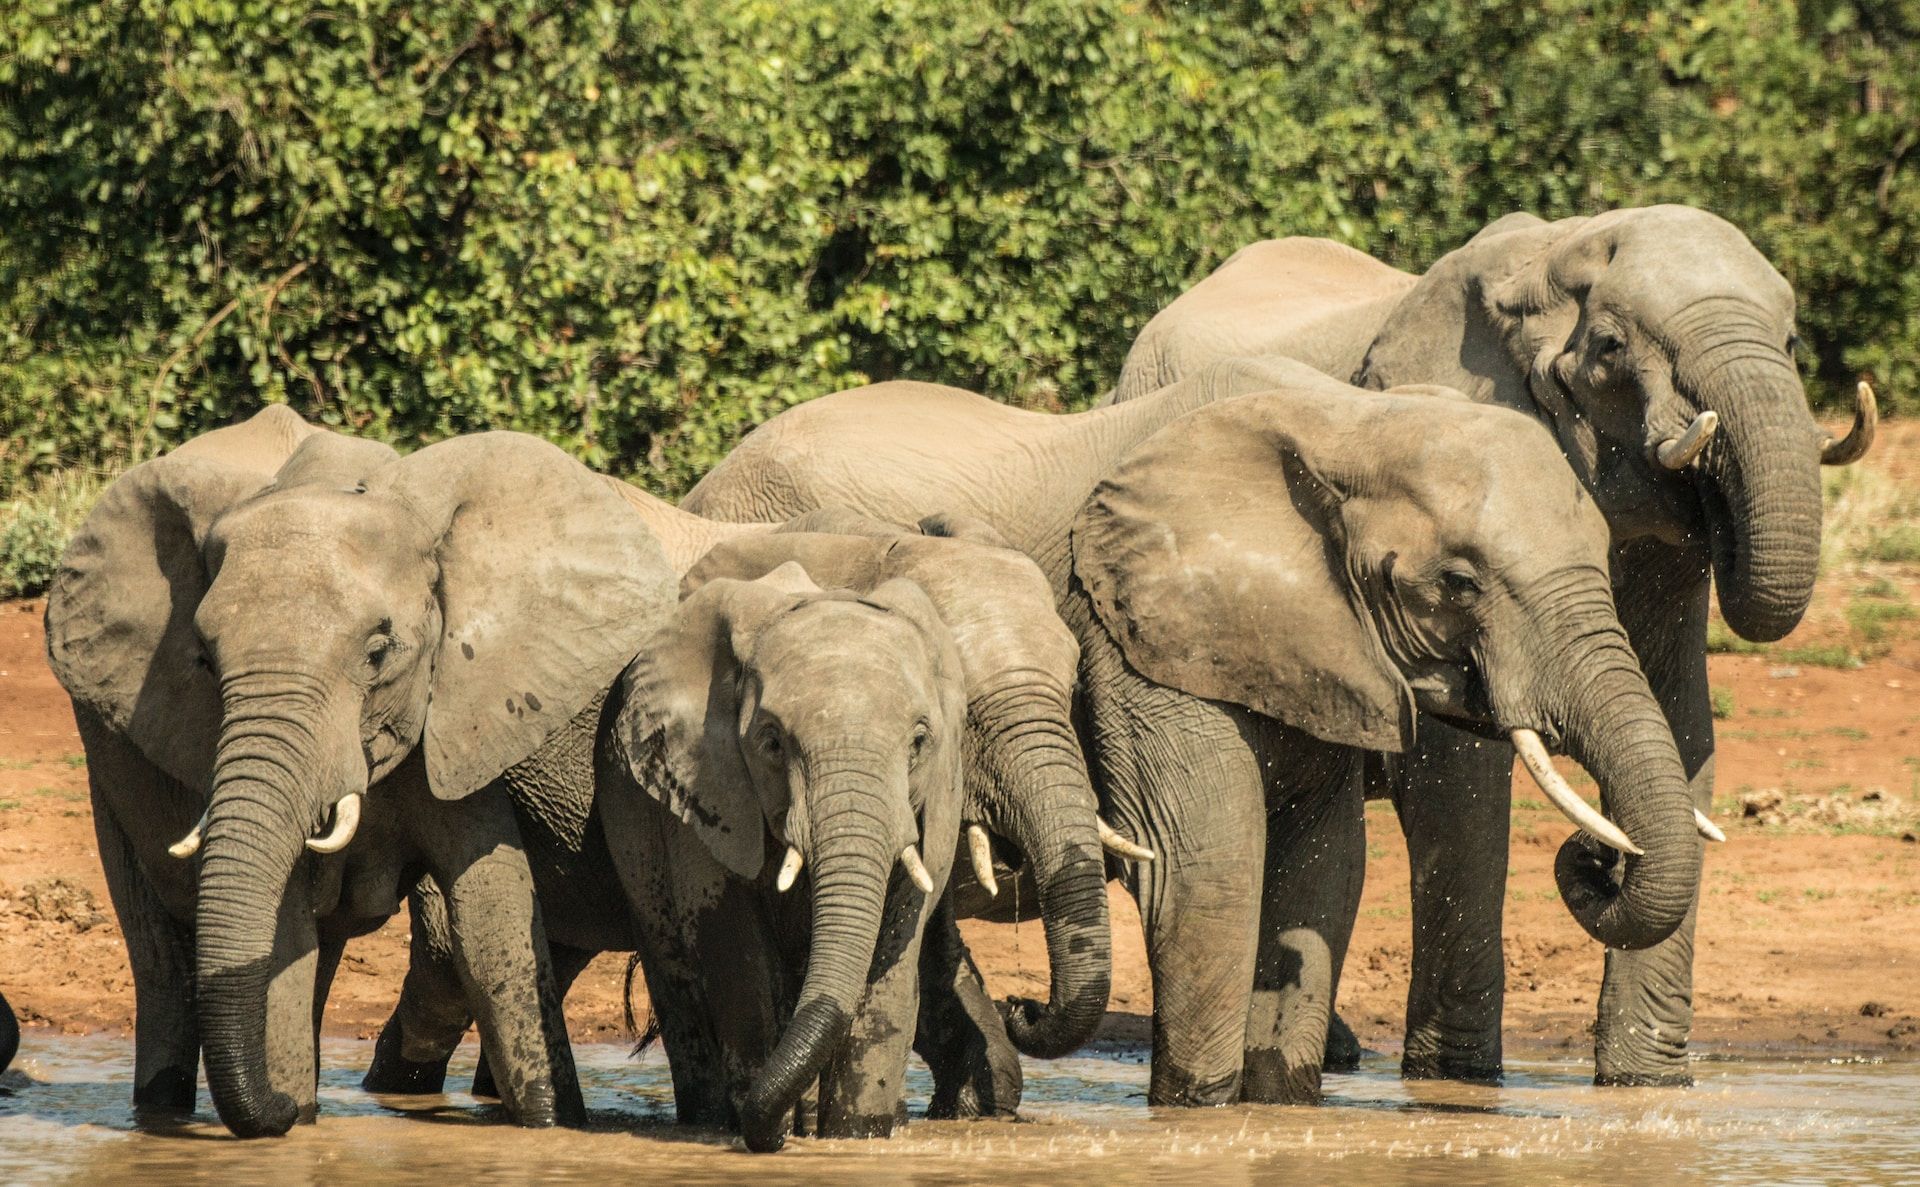 a herd of elephants drinking water from a river